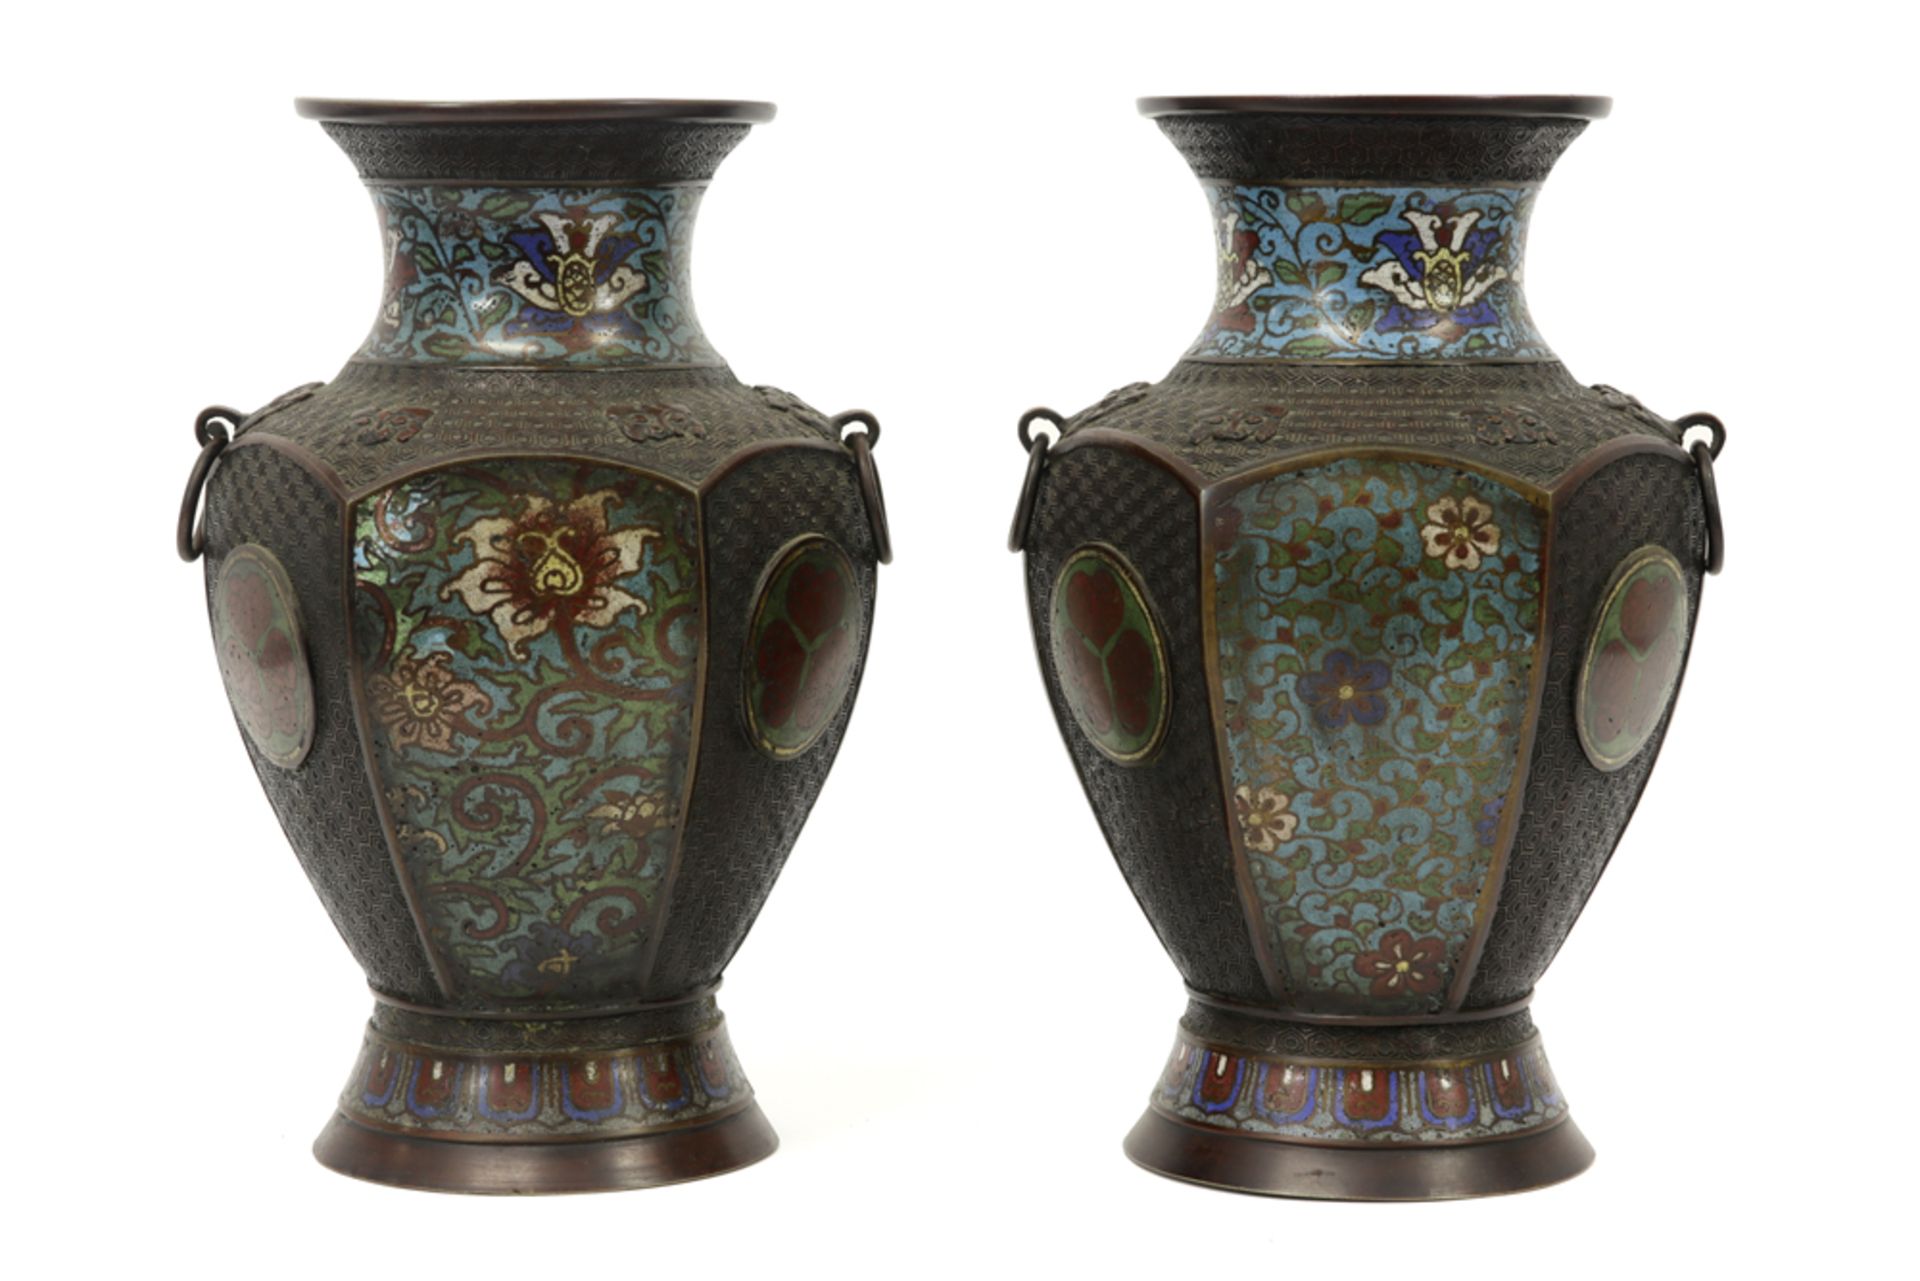 pair of antique Japanese vases in marked bronze with cloisonné||Paar antieke Japanse vazen in